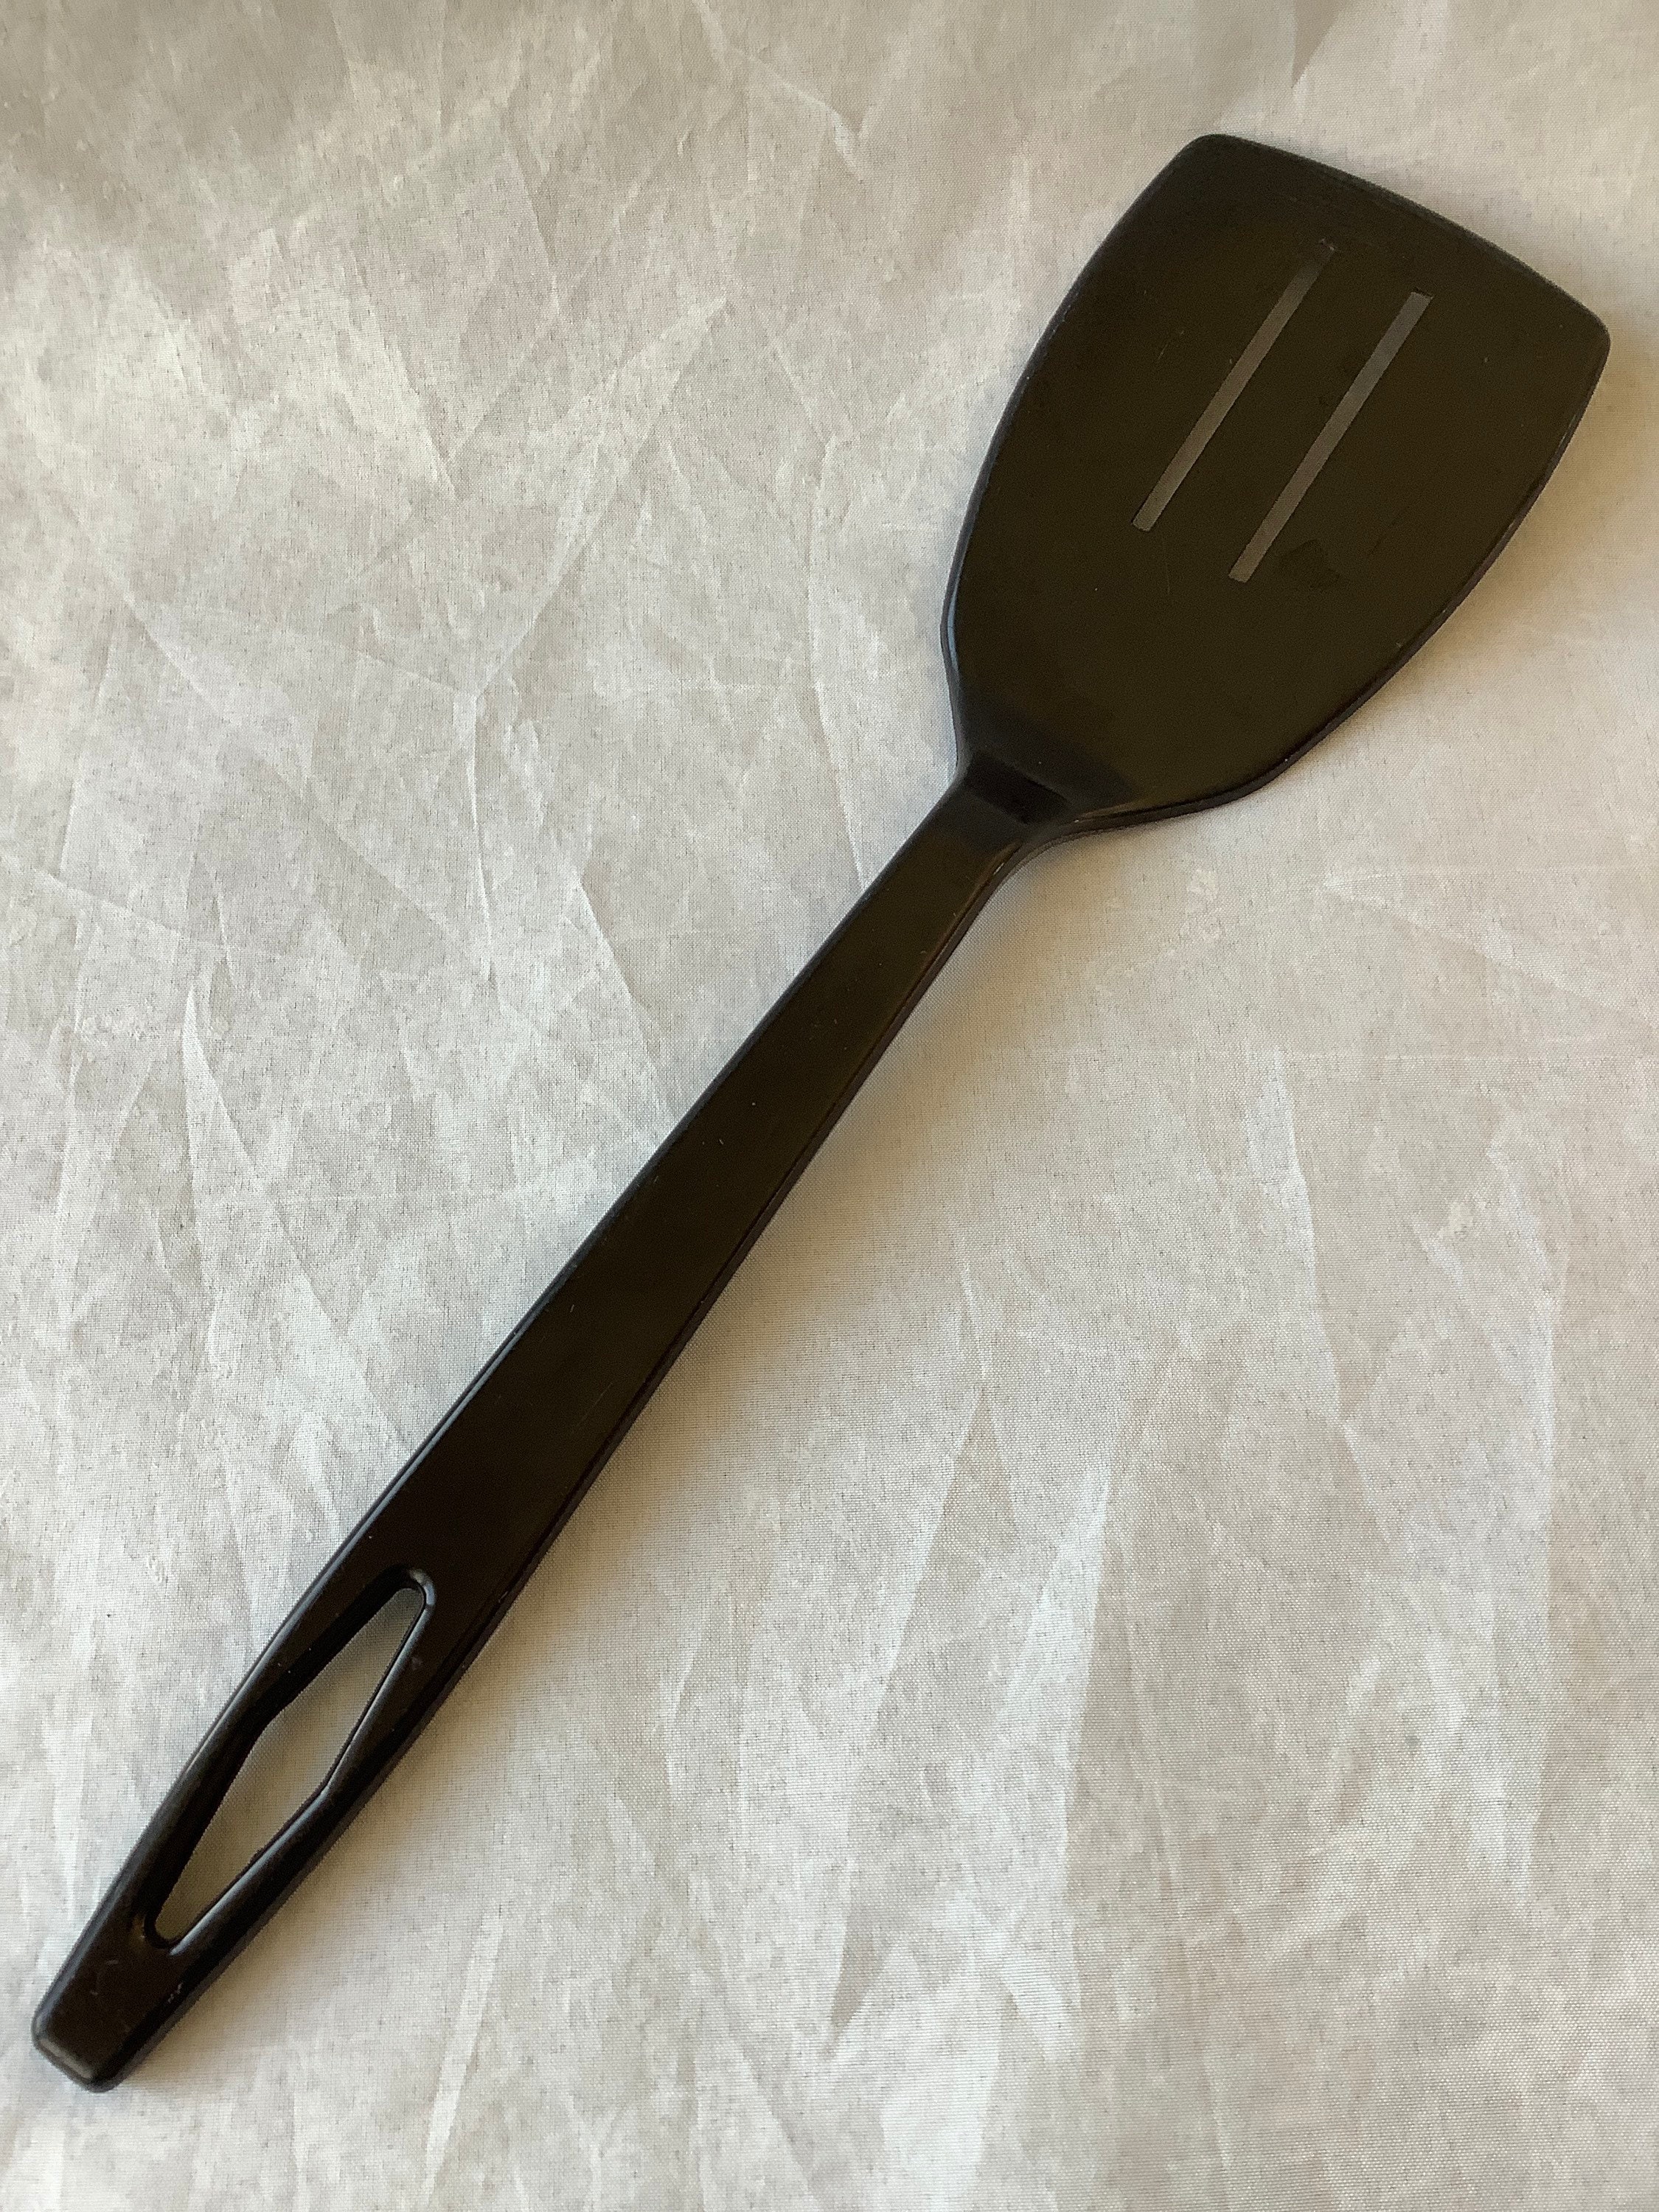 Assorted Plastic Nylon Kitchen Utensils Vintage Slotted Spoon Spatula/flipper  Ladles Your Choice of Cooking Utensils 